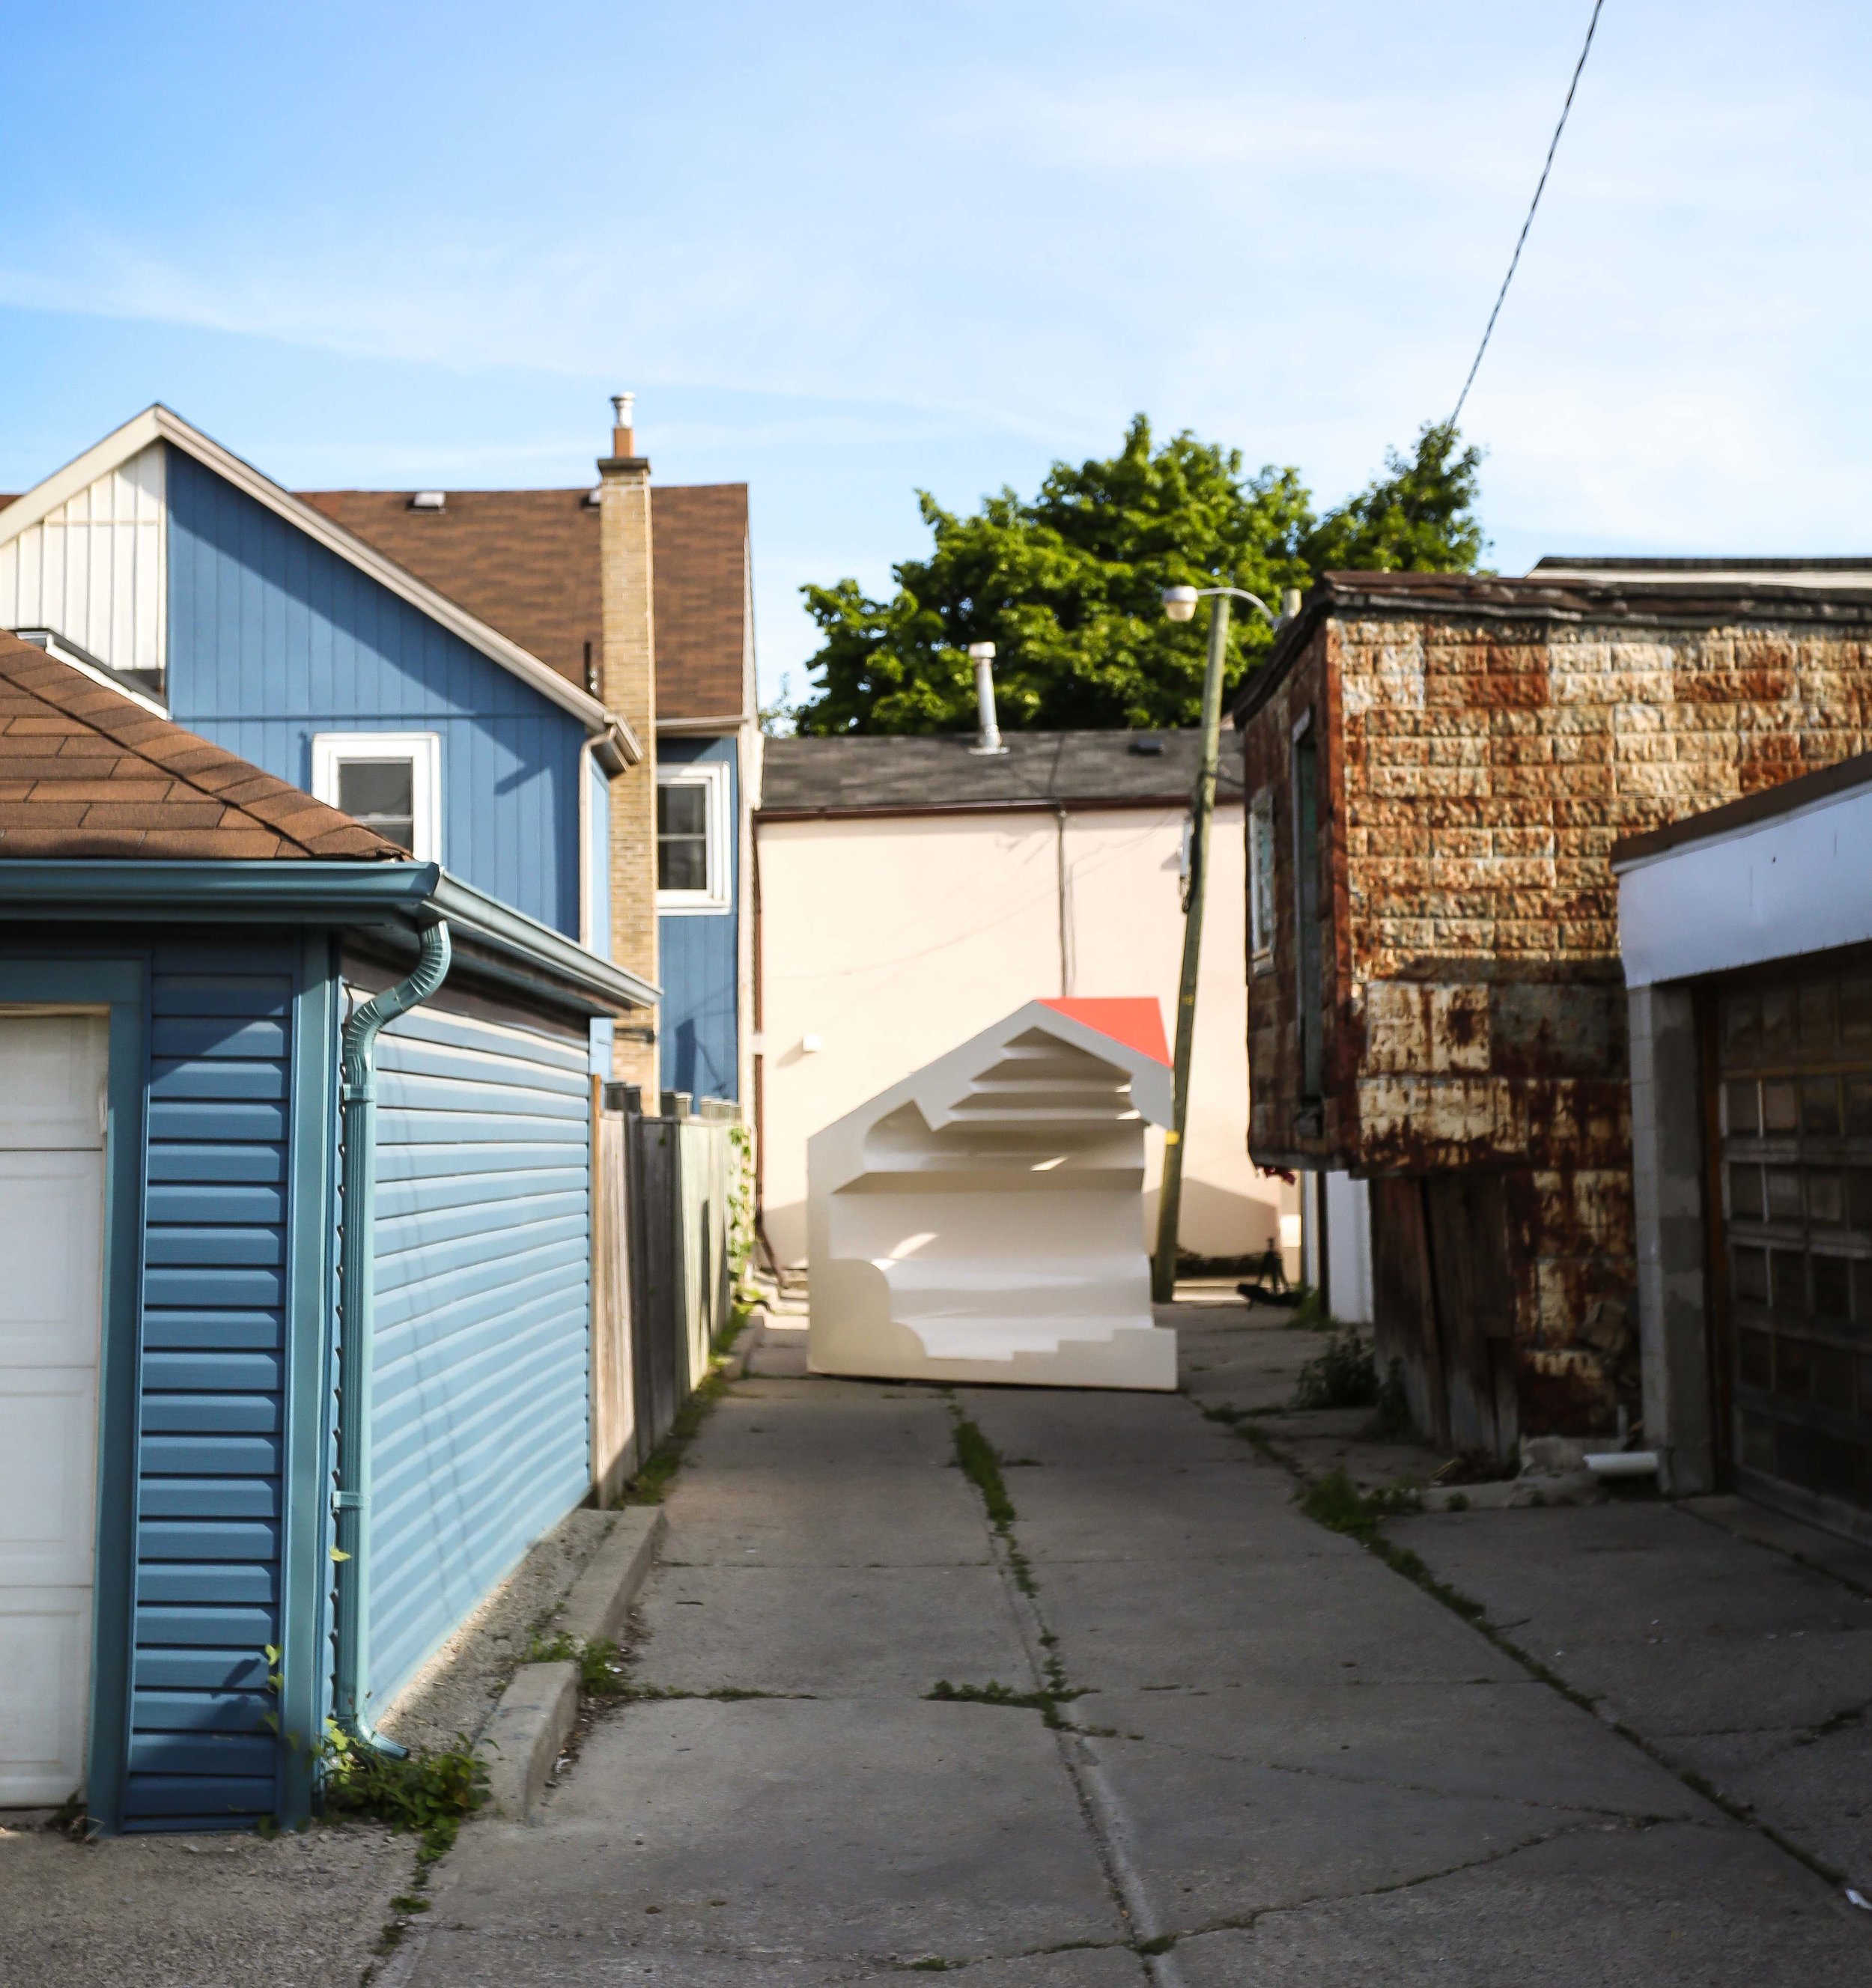 01 view from alley.jpg